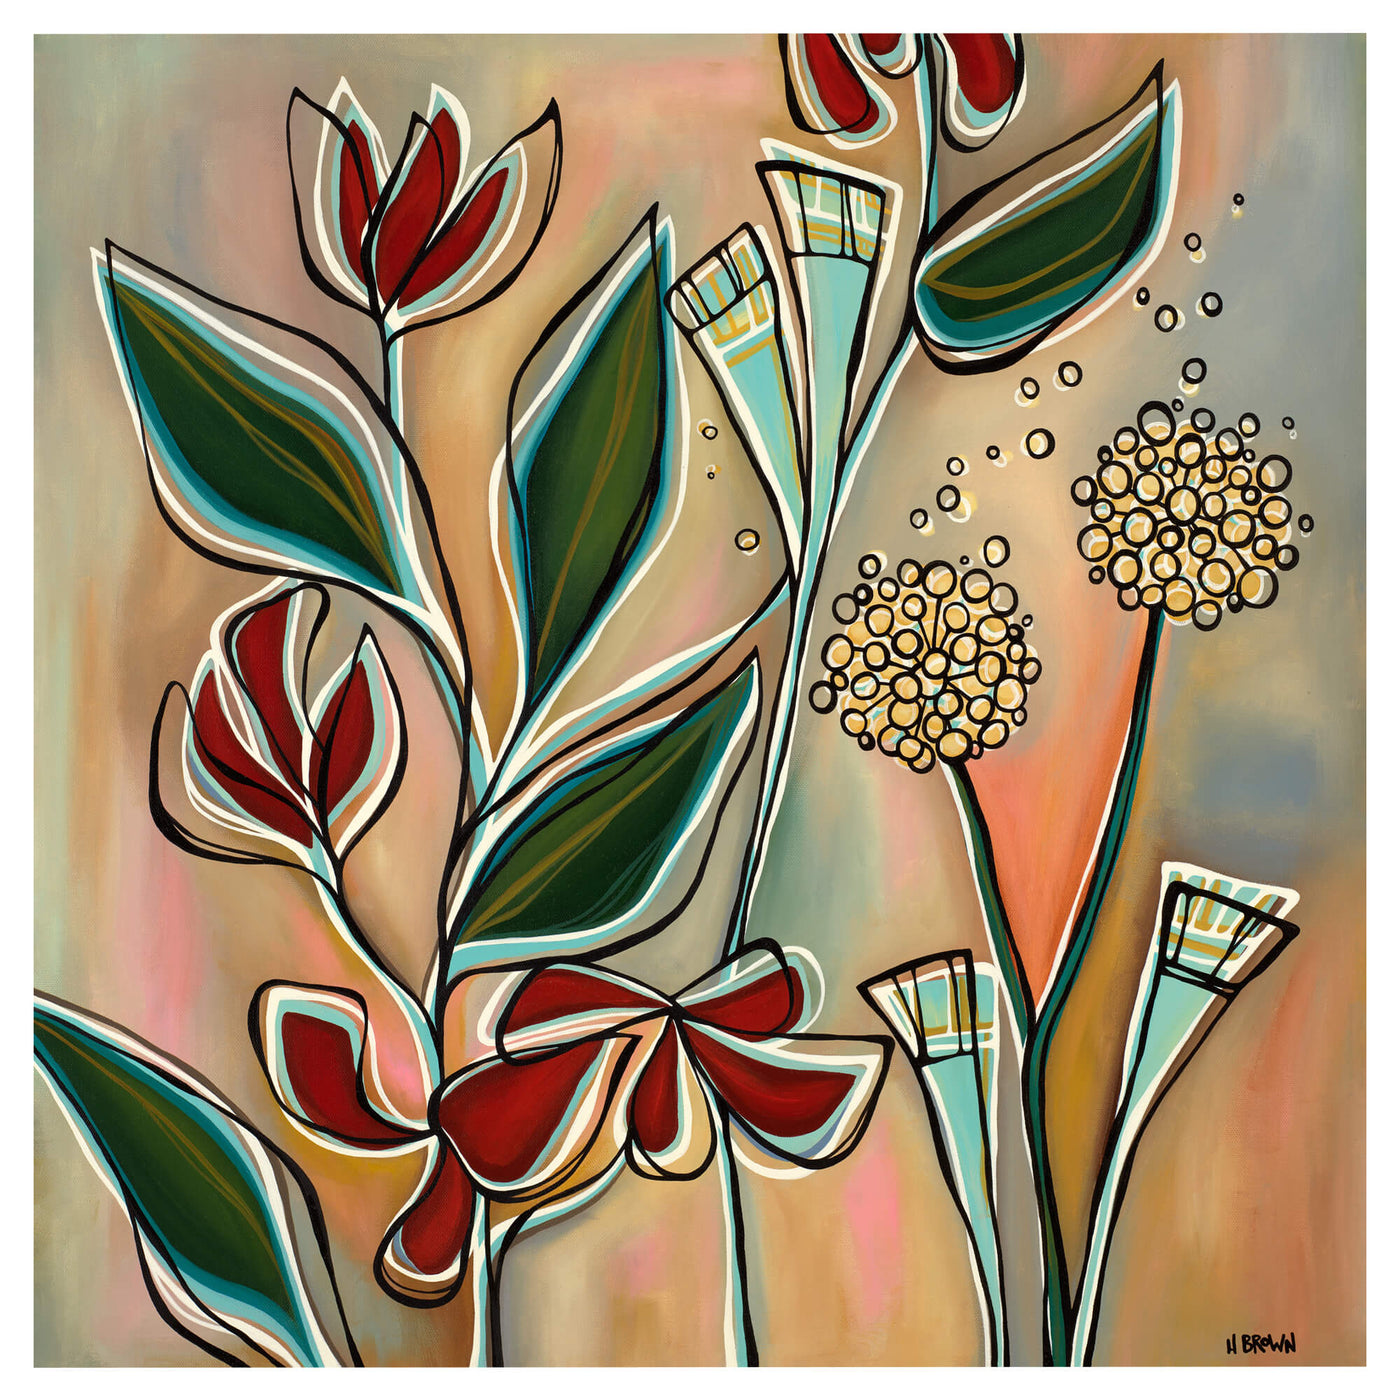 Vibrant red and yellow Hawaiian flowers painted by Hawaii surf artist Heather Brown